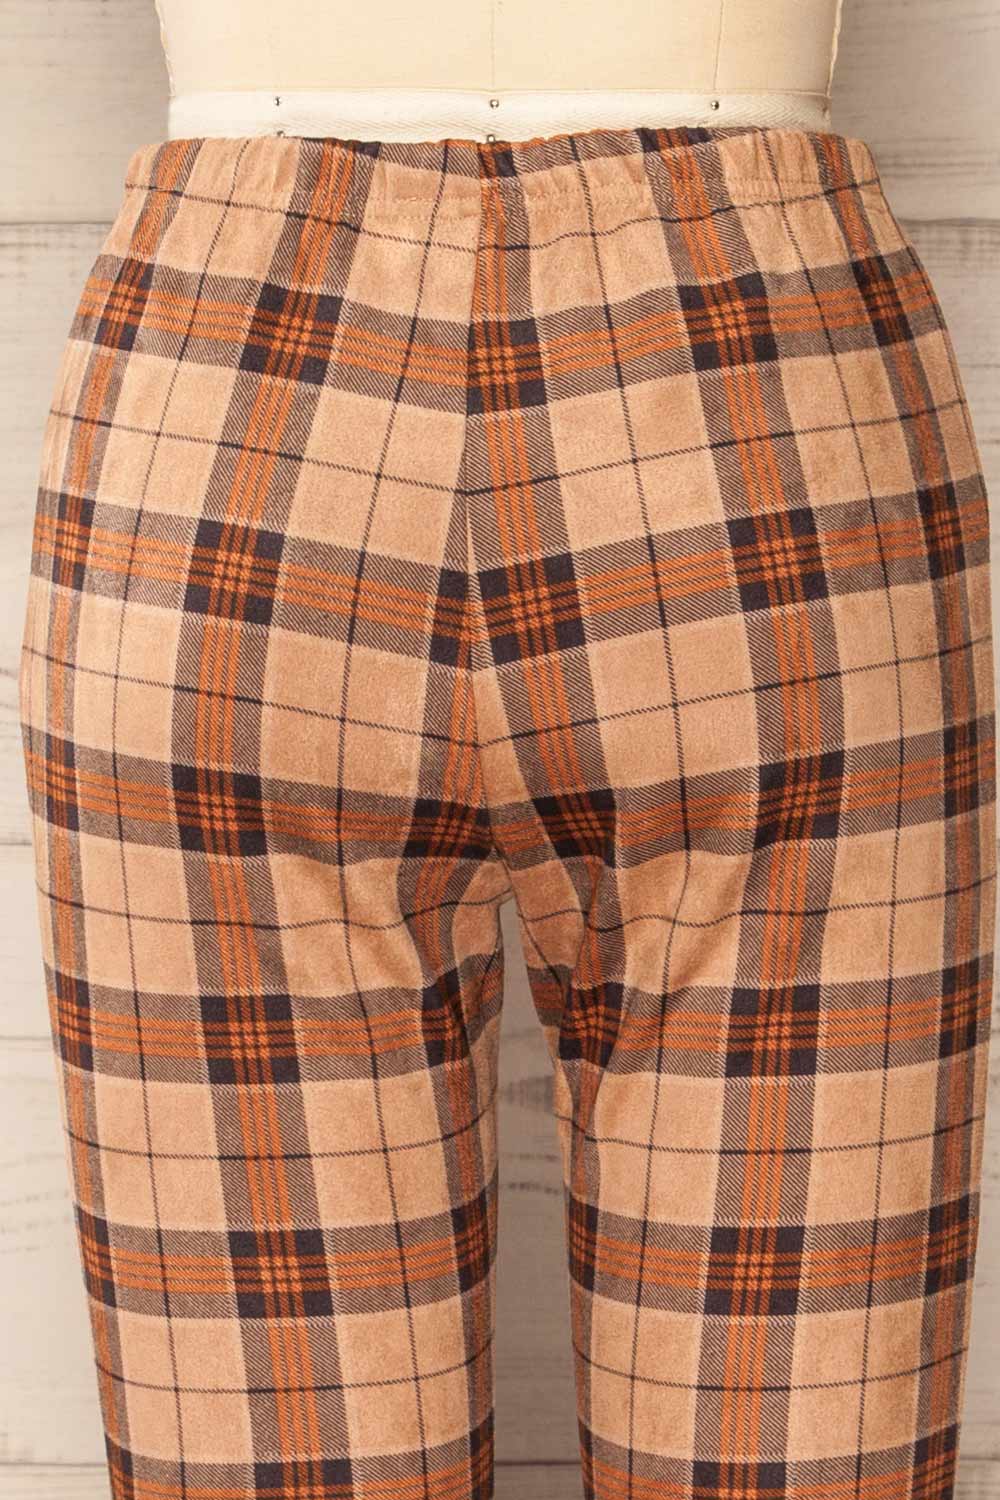 Milumia Women's High Waist Cropped Plaid Tartan Print Carrot Pants Fashion  Party Trousers with Pocket Multicoloured Small at Amazon Women's Clothing  store